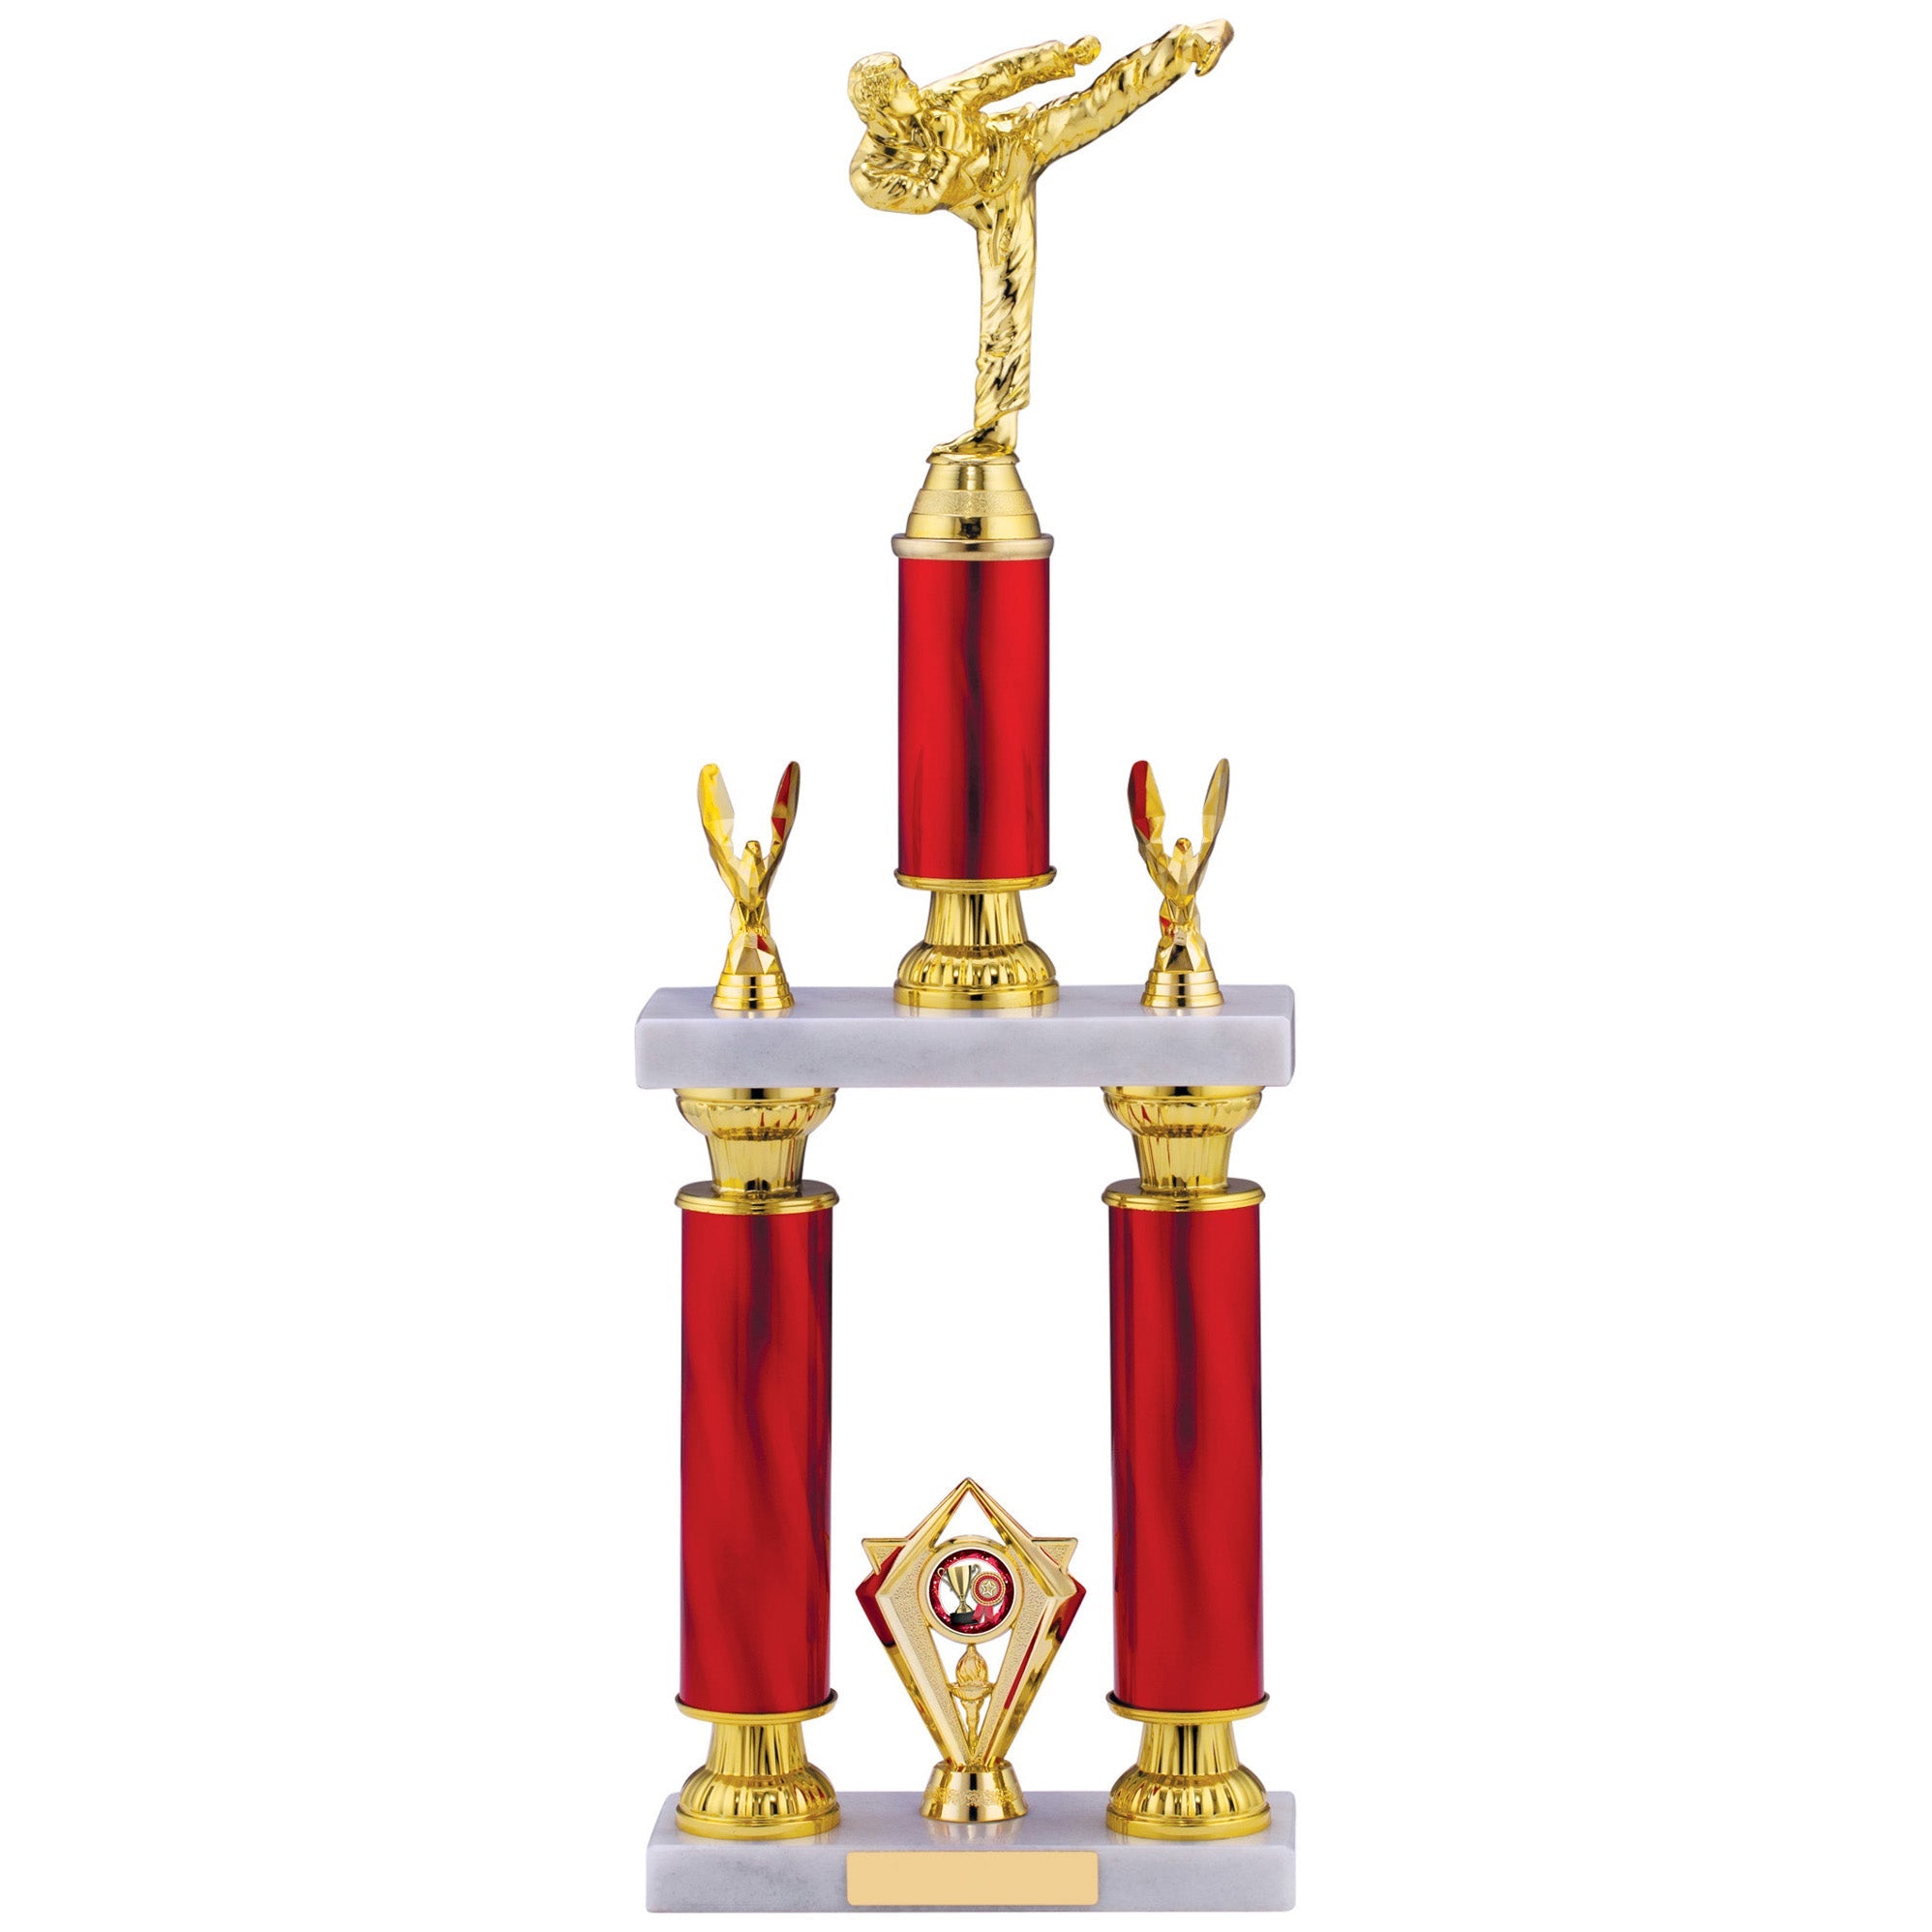 Gold Eagle Karate Kick with Red Tube Column Trophy